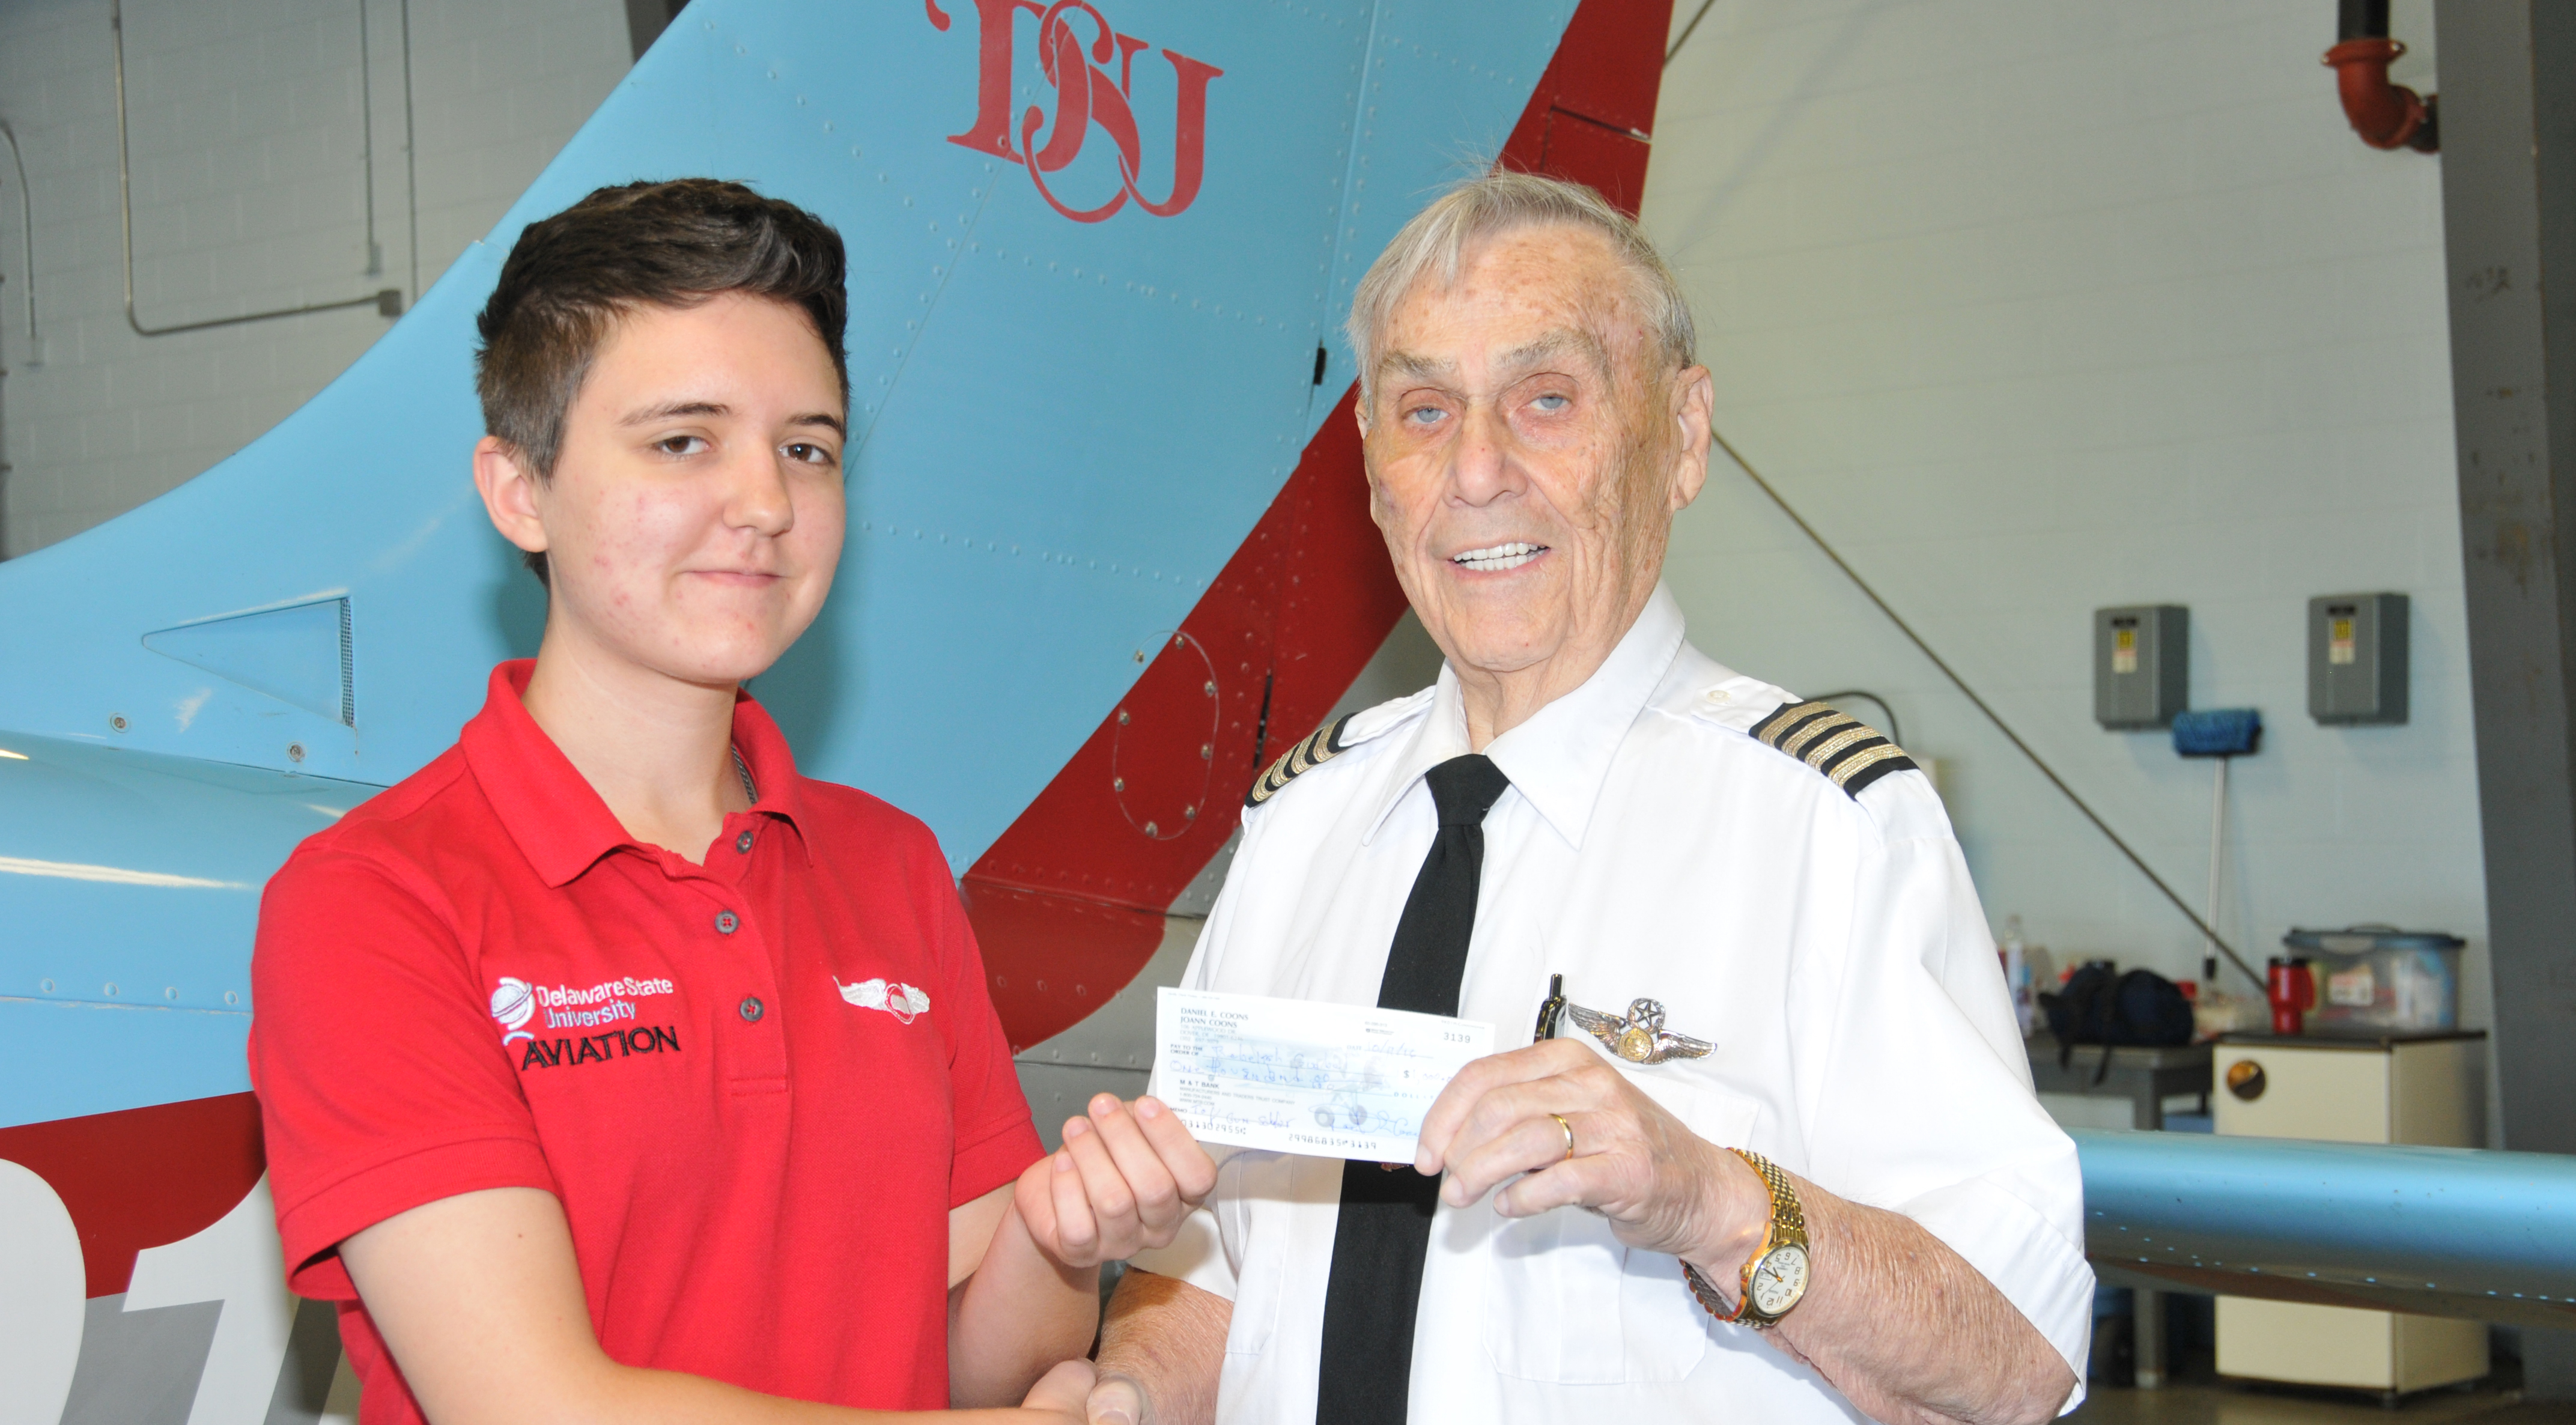 Dr. Daniel E. Coons, shown last fall presenting a scholarship check to aviation major Rebekah Goebels, passed away on May 3 after a battling cancer for several years.